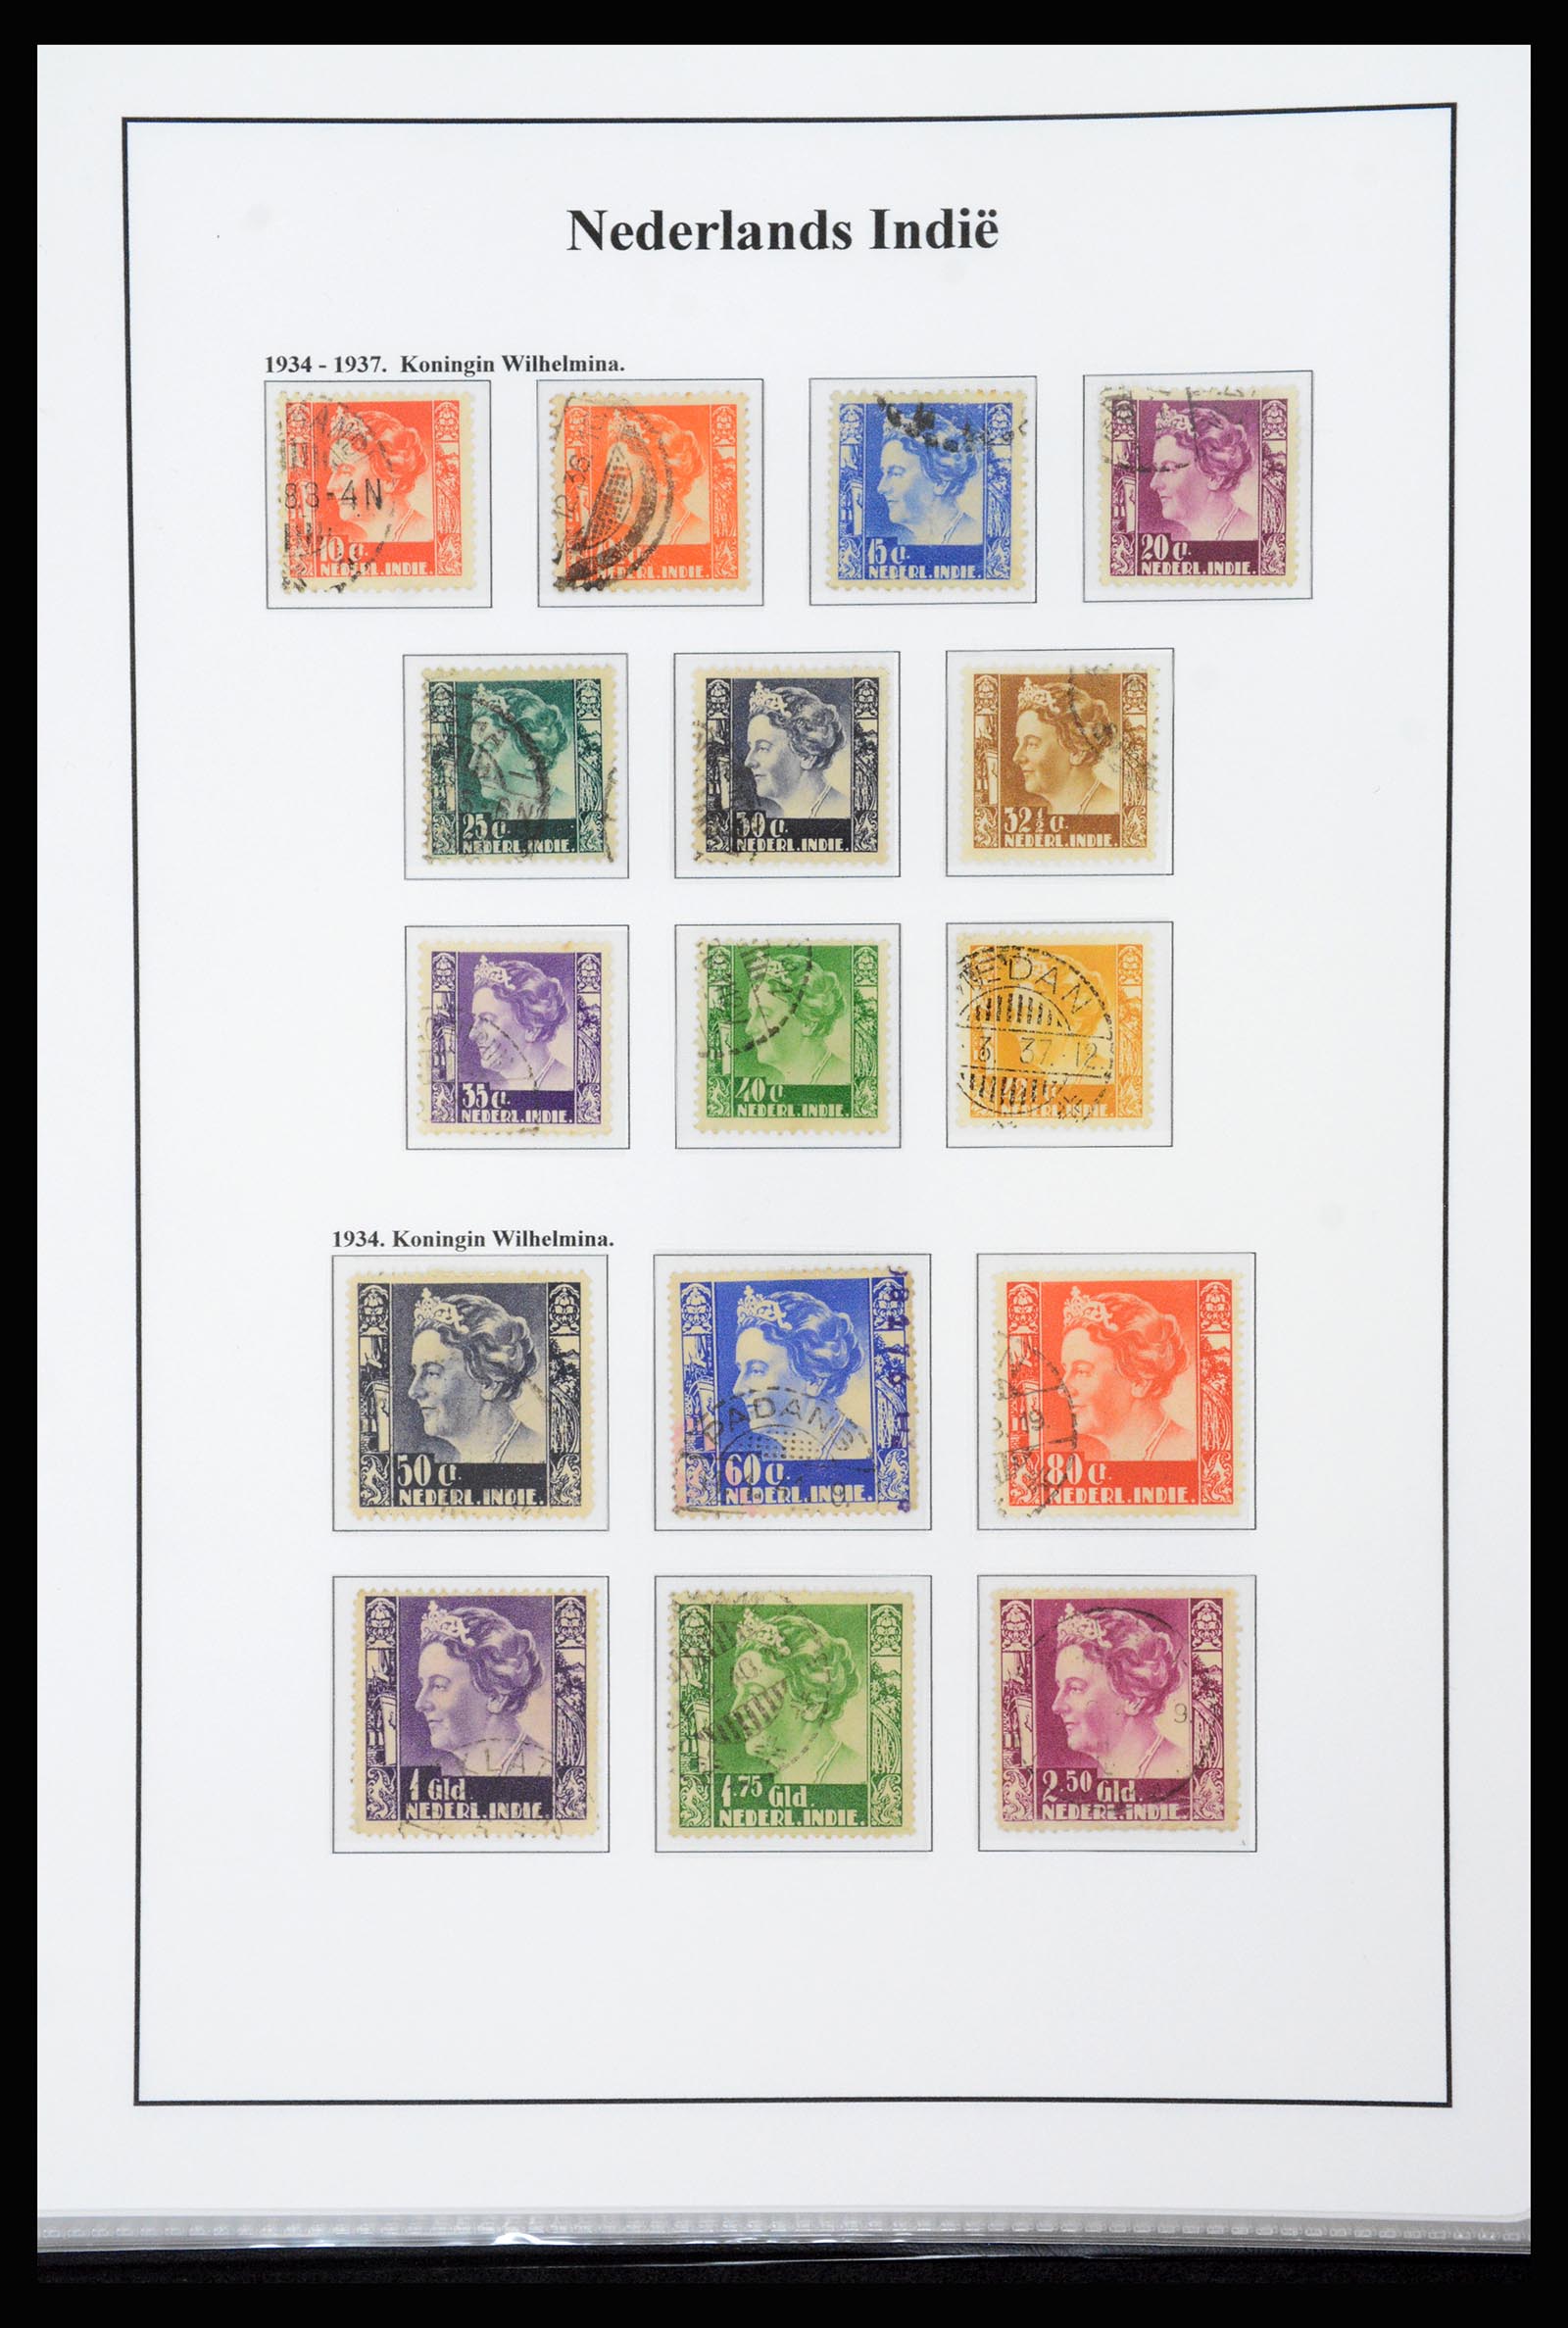 37247 017 - Stamp collection 37247 Dutch east Indies 1864-1949.